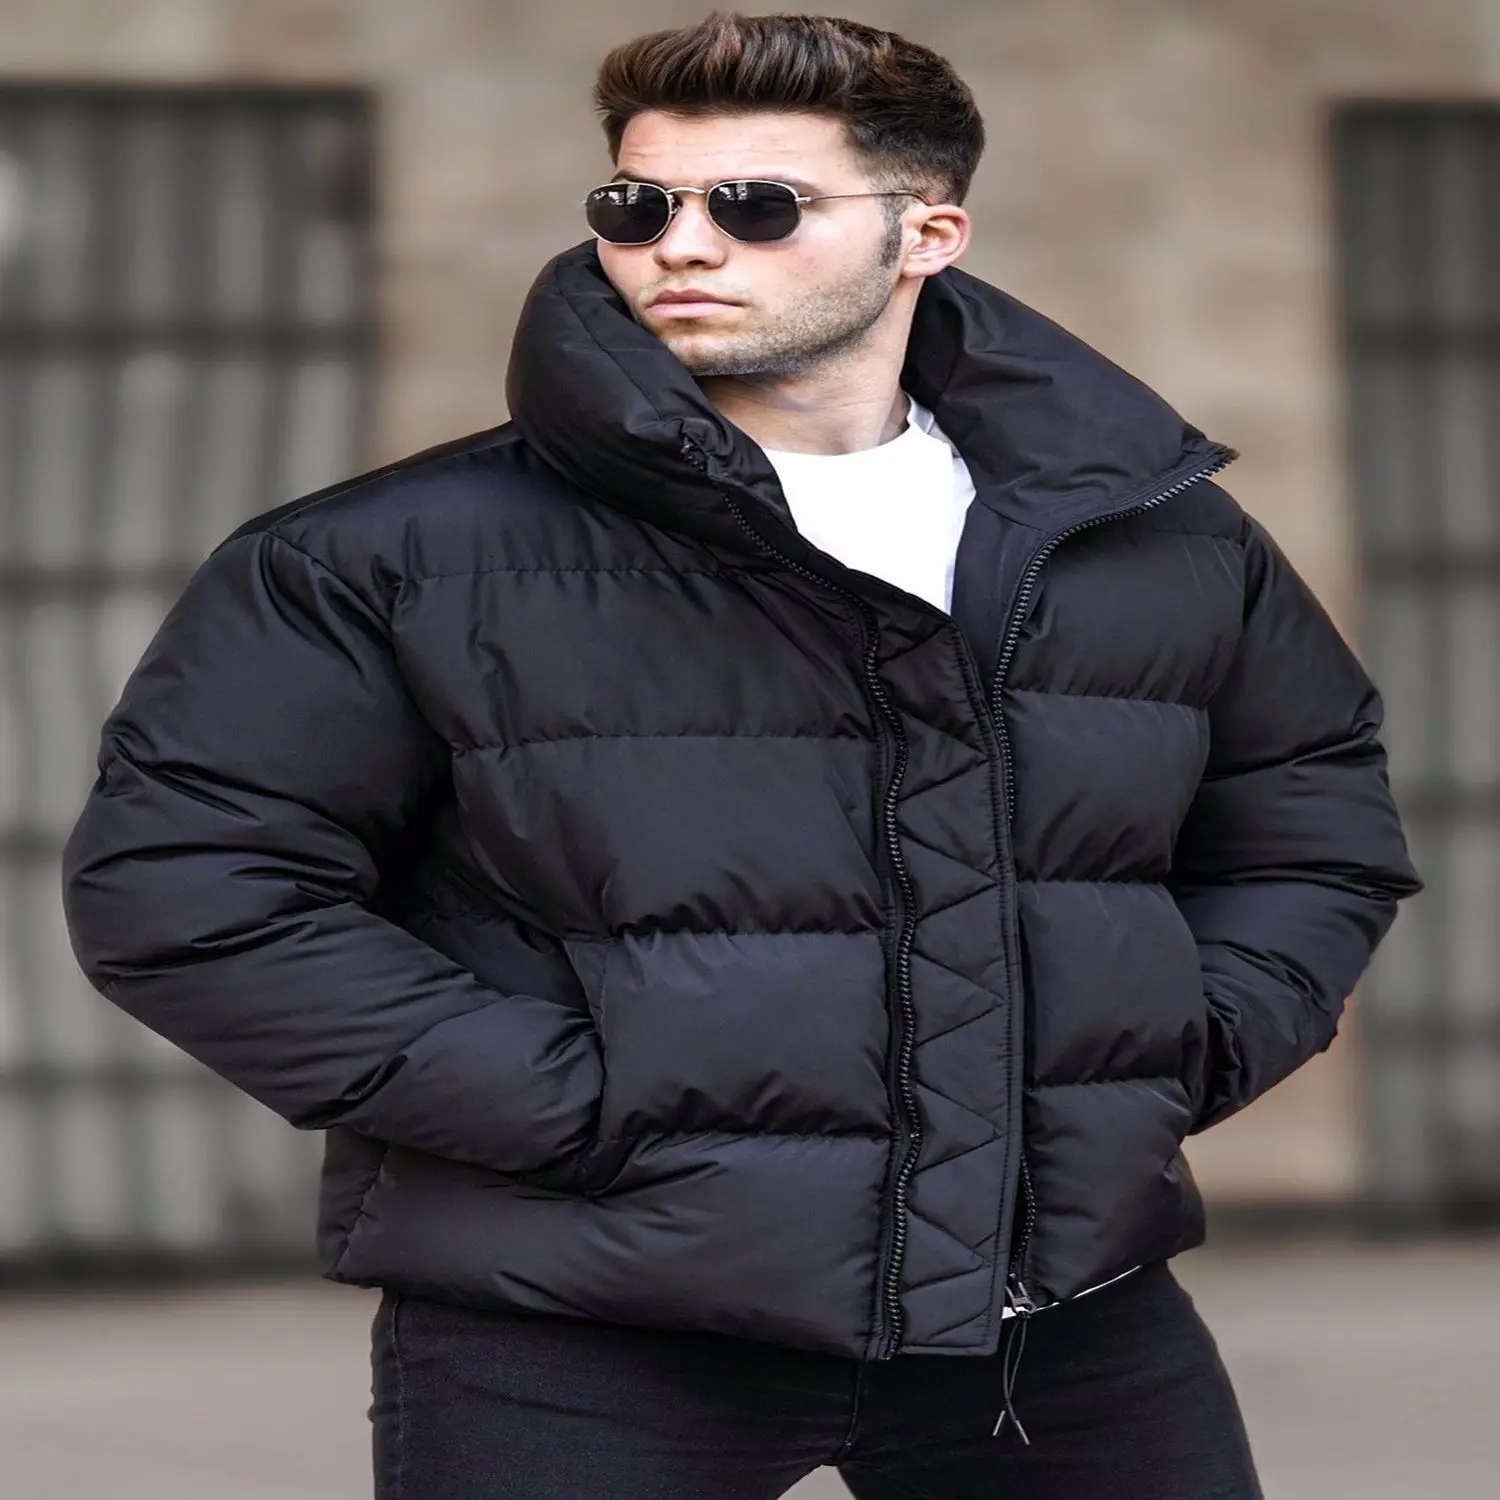 Men's Straight Inflatable Coat Male all season Ultra lightweight Packable down jacket water and wind resistant breathable jacket big size